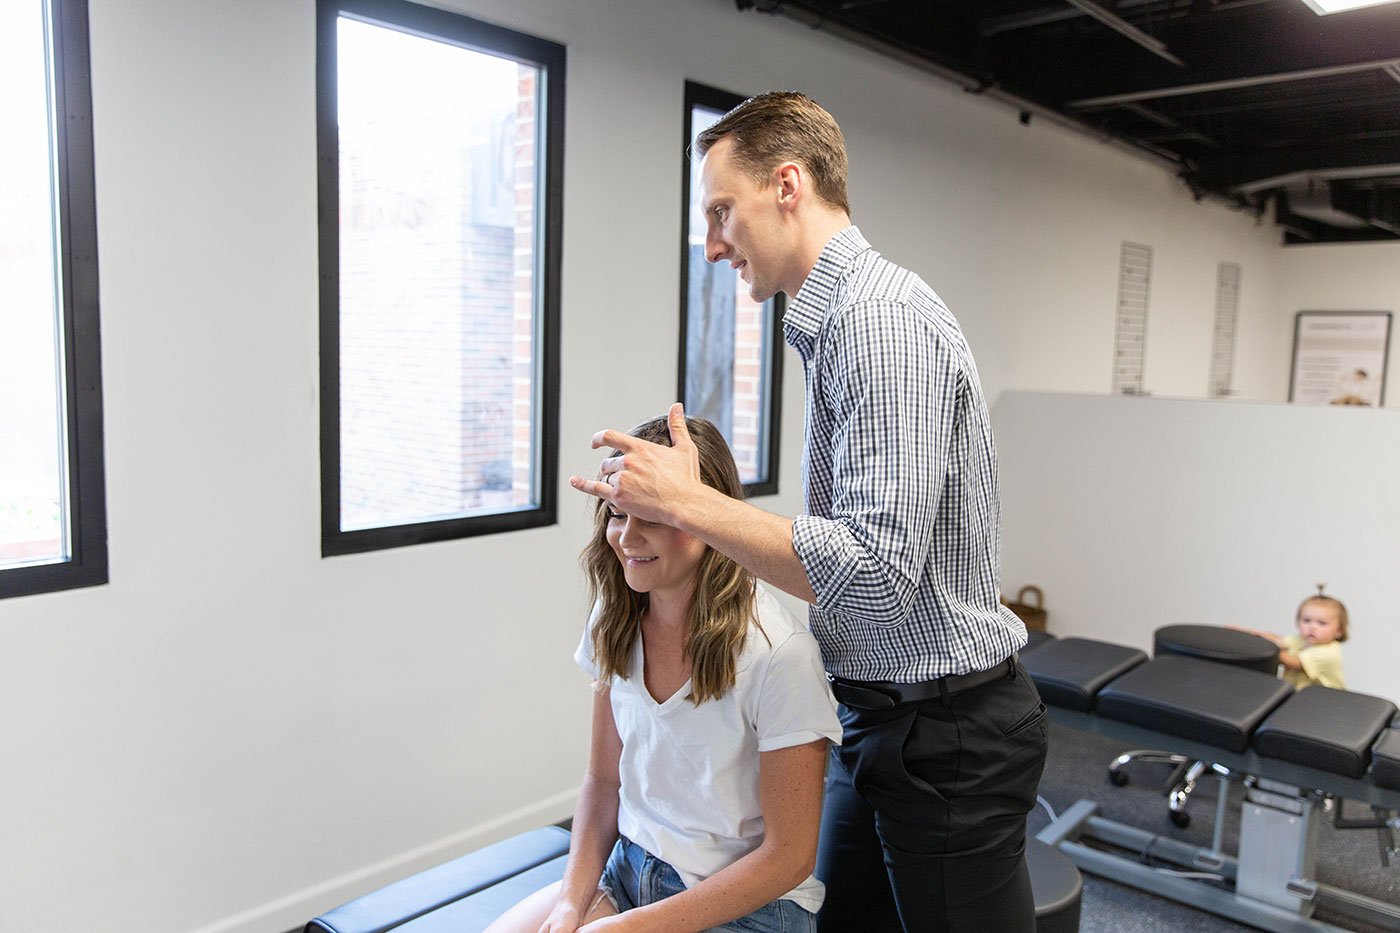 chiropractic adjustment for migraine headaches by Kilby Rech at Thrive Family Chiropractic